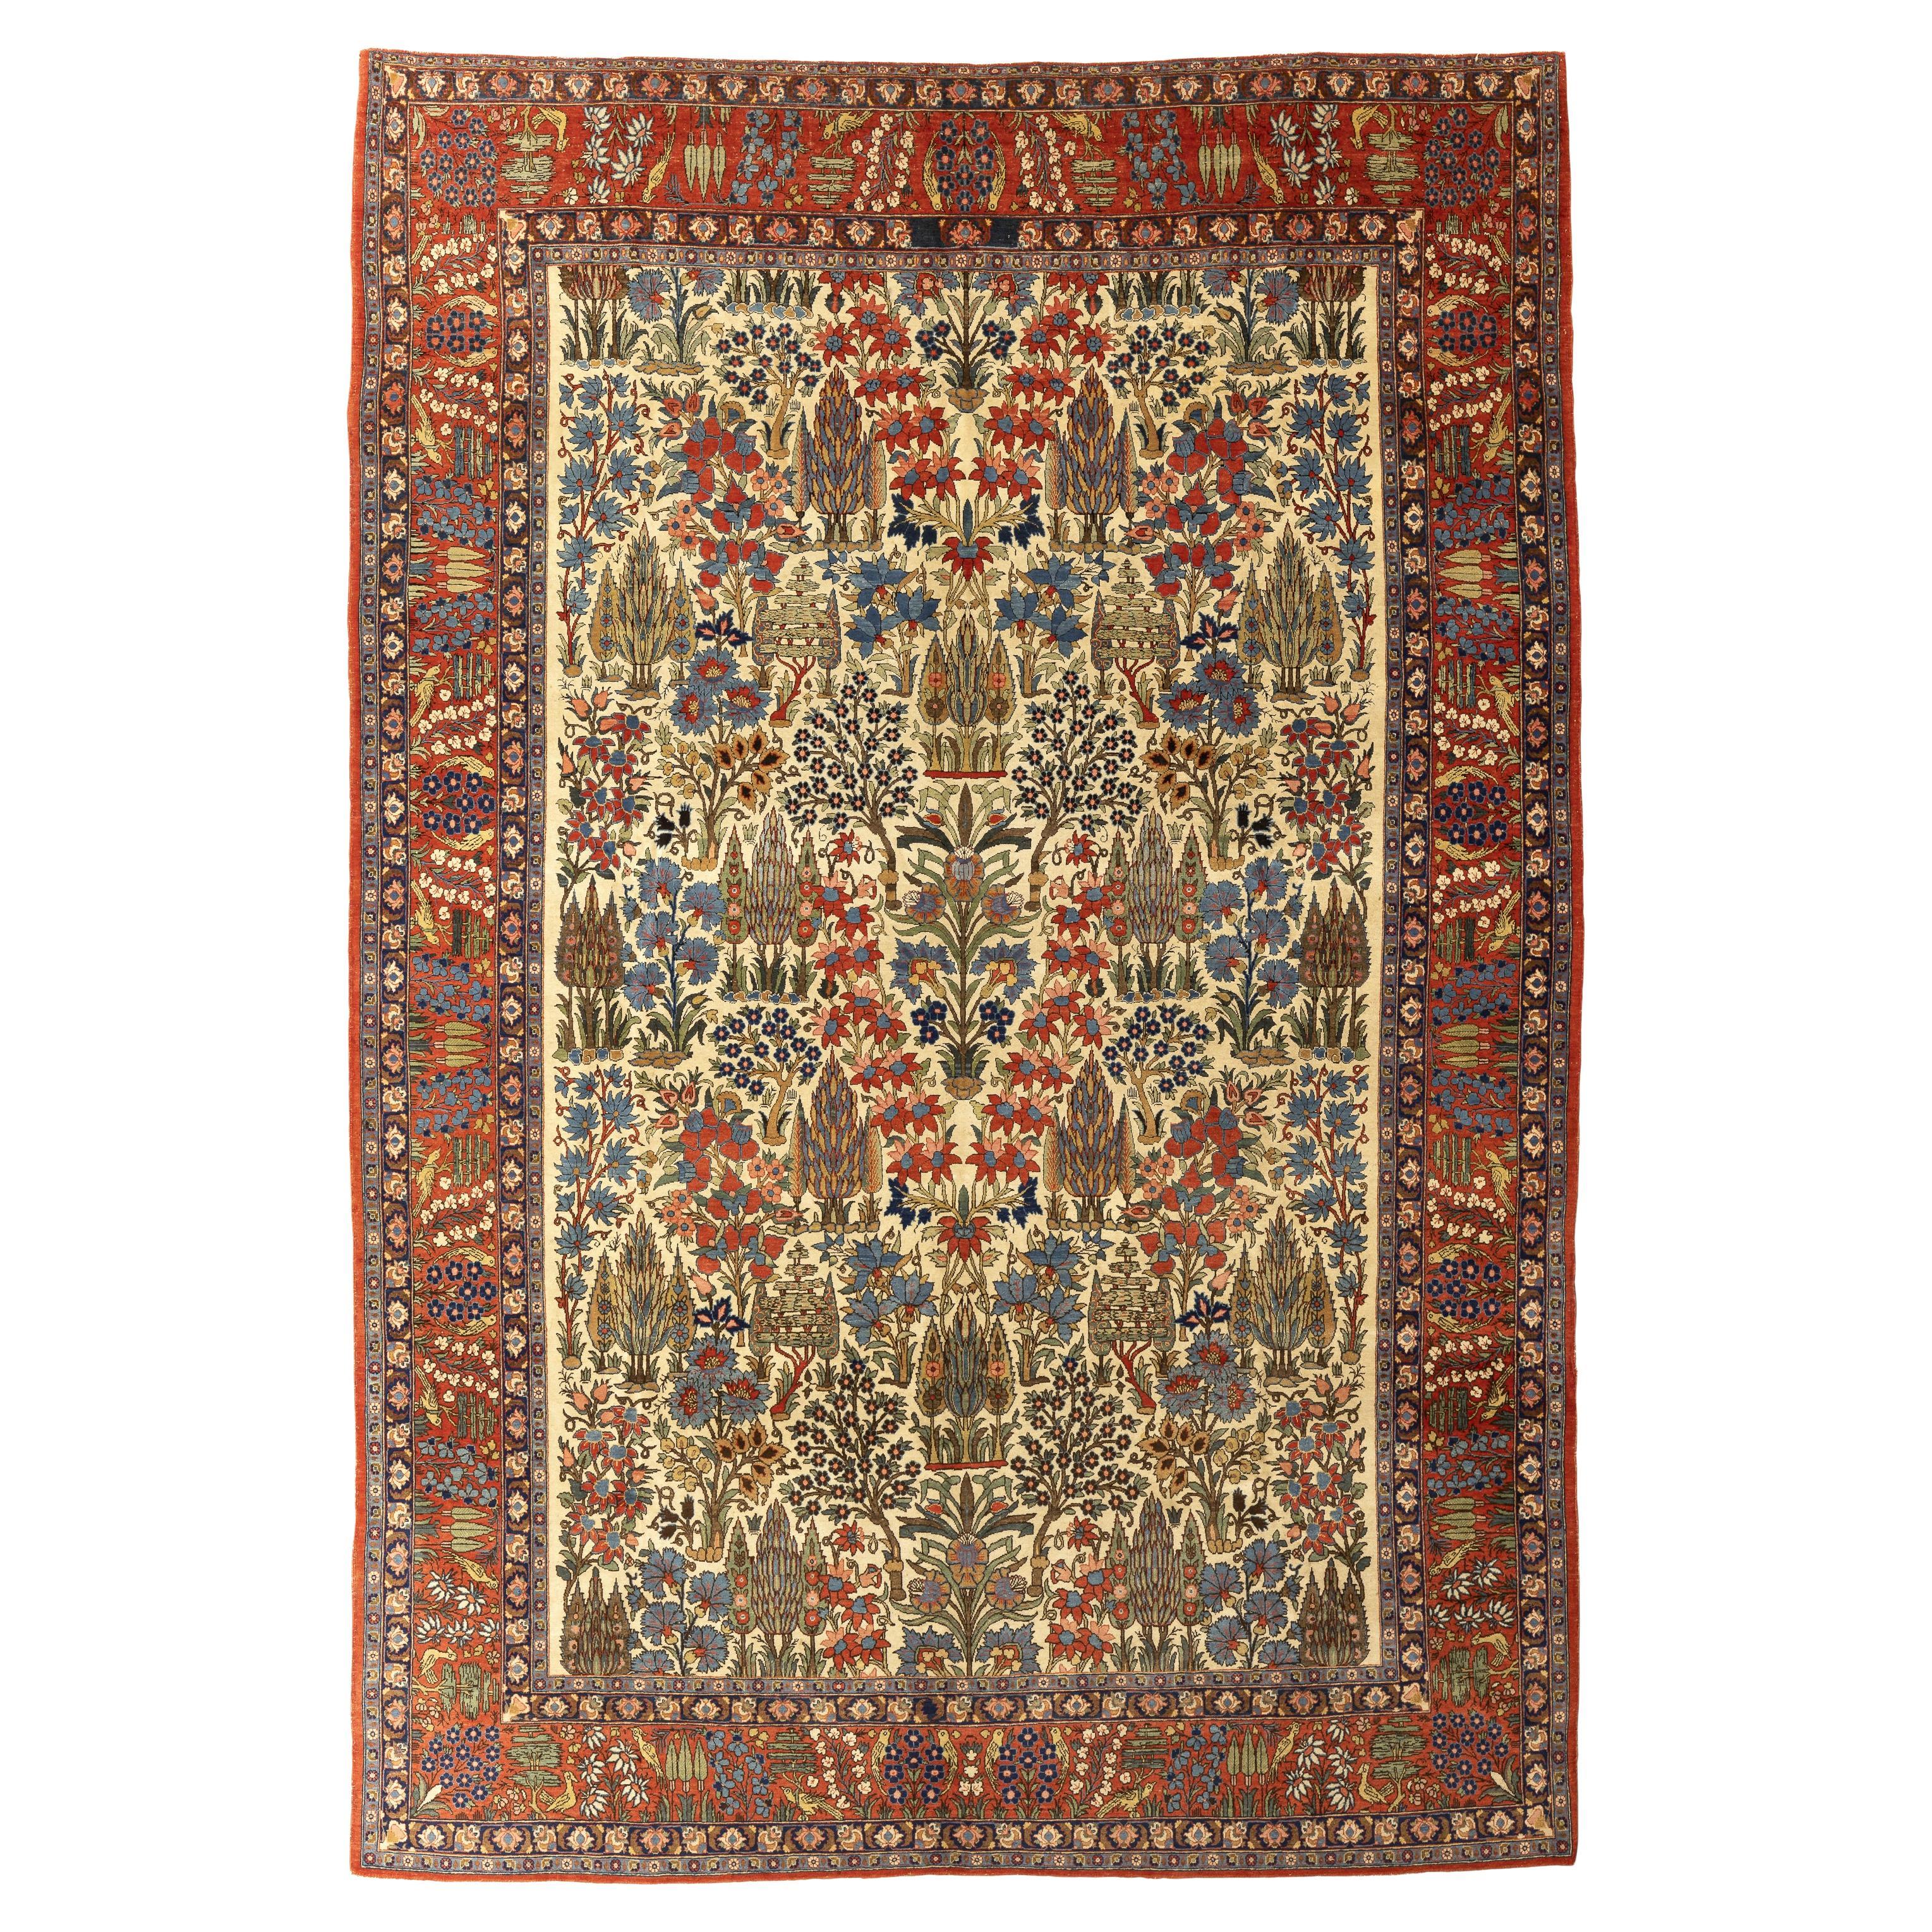 Isfahan – Central Persia

Dexterously woven with a painter’s use of exquisite colour, each blossom, leaf, and bough of this lush Isfahan exhibits a distinctive jewel-like clarity and mastery of chiaroscuro, bringing each element of this wonderland